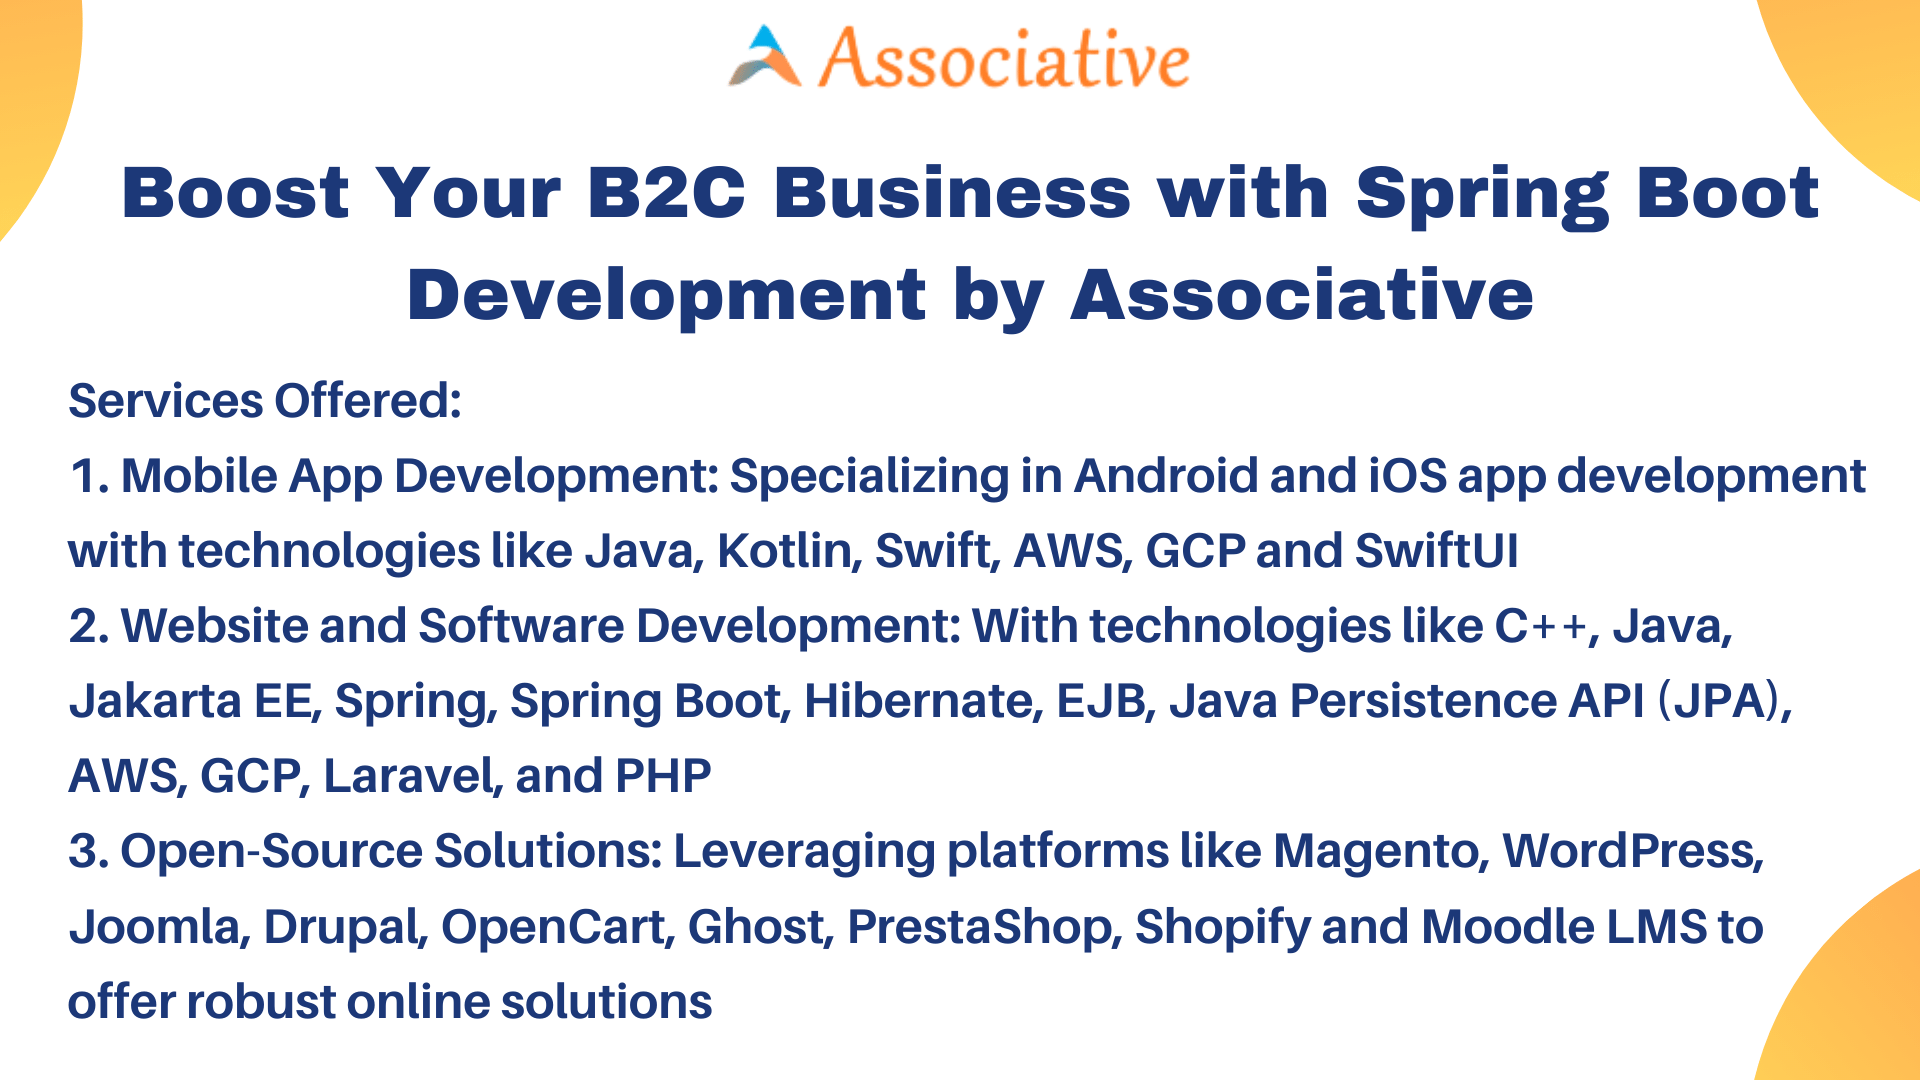 Boost Your B2C Business with Spring Boot Development by Associative